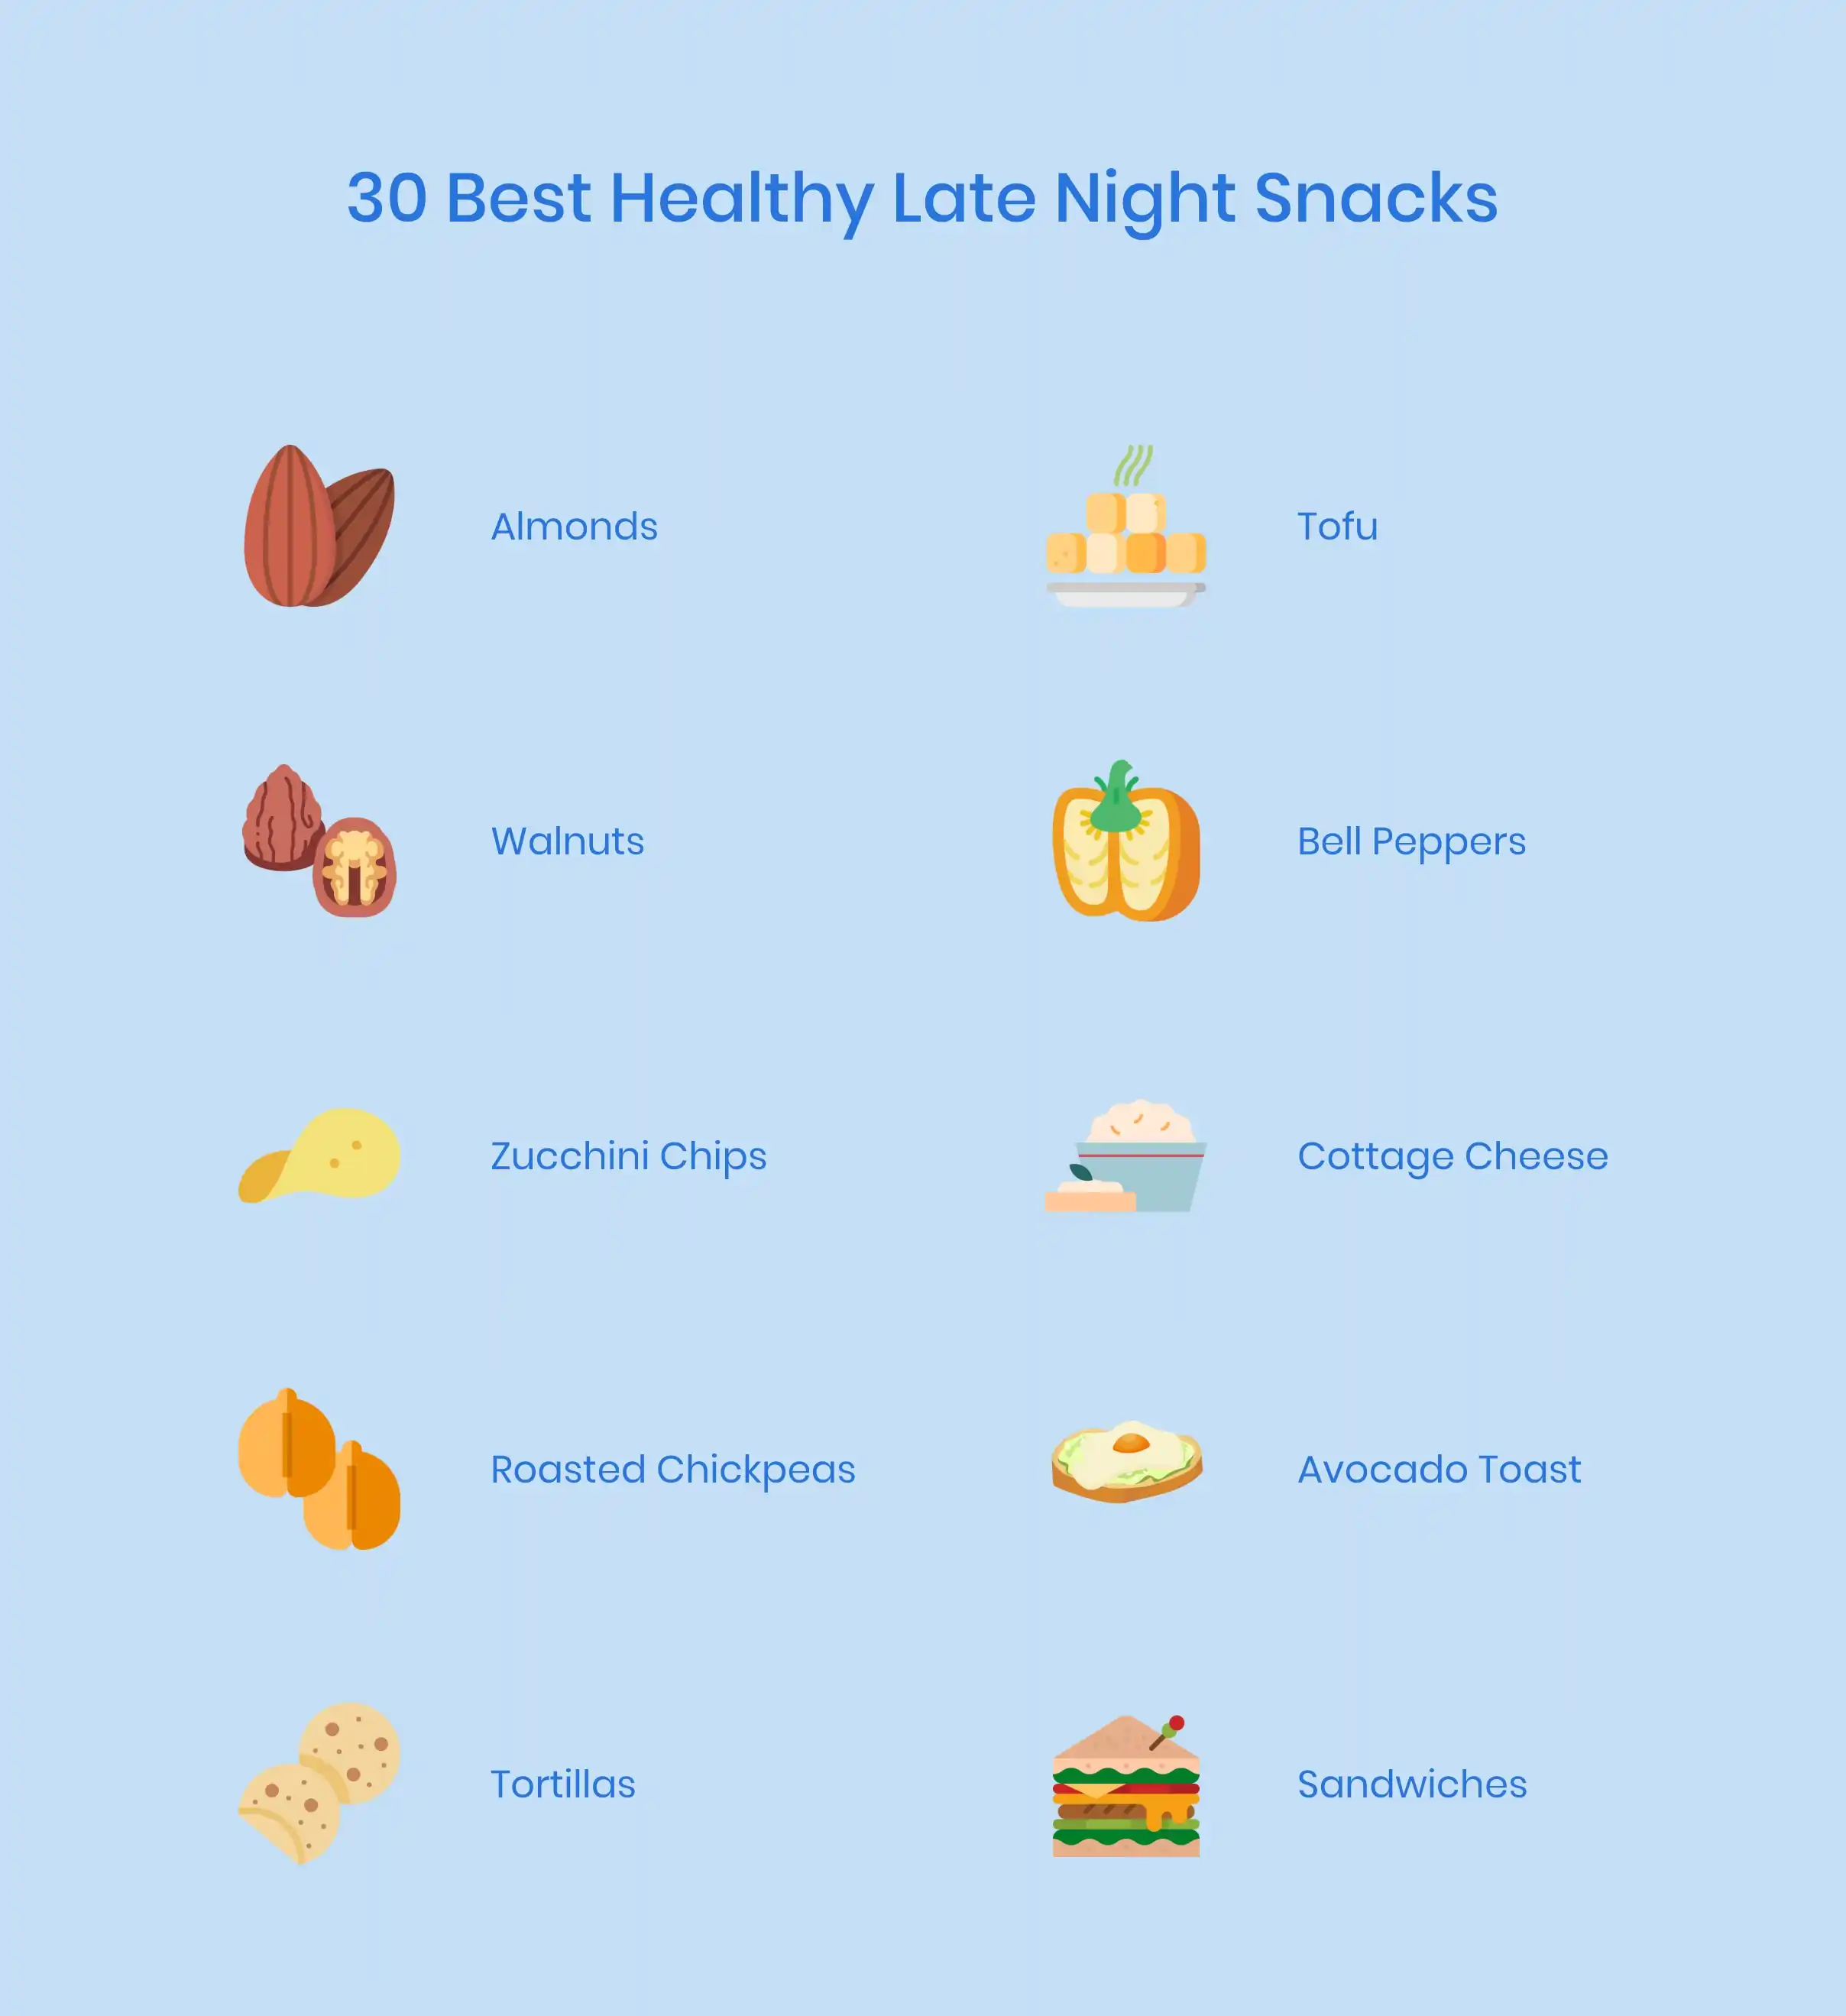 Bedtime Snacks: When to Say No to A Midnight Snack